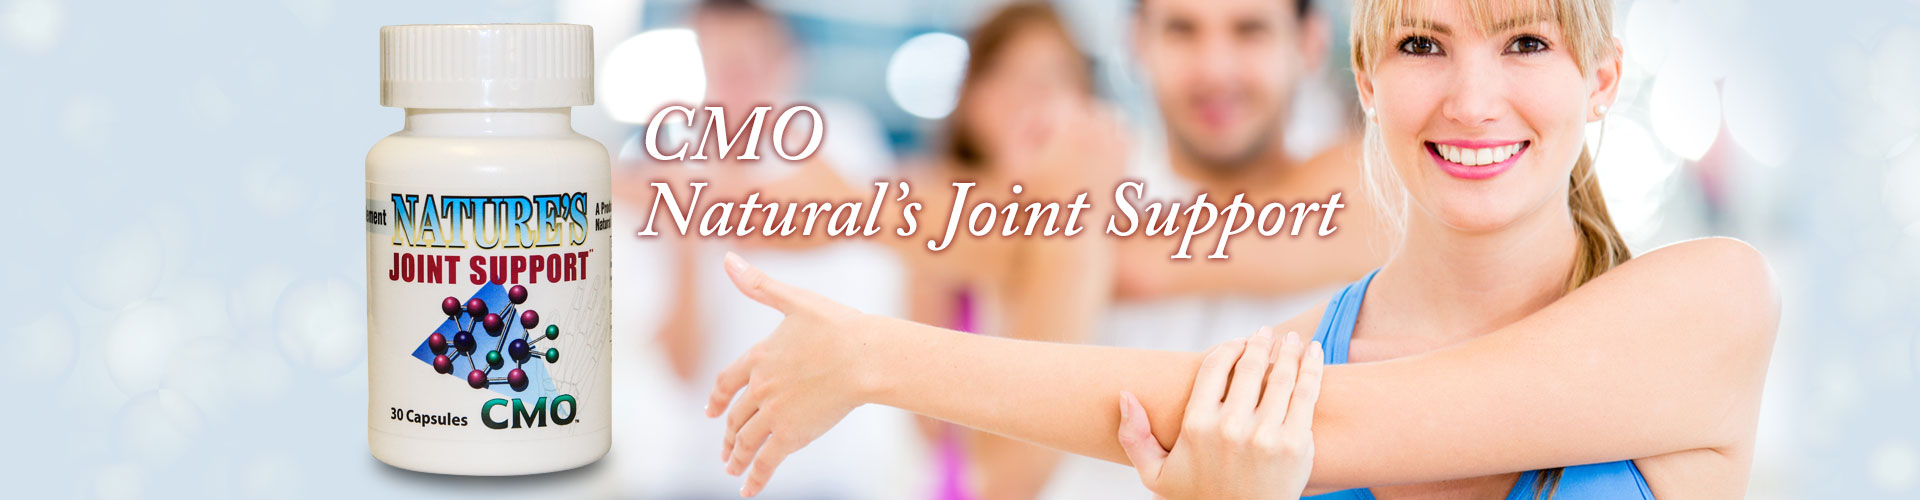 CMO joint support